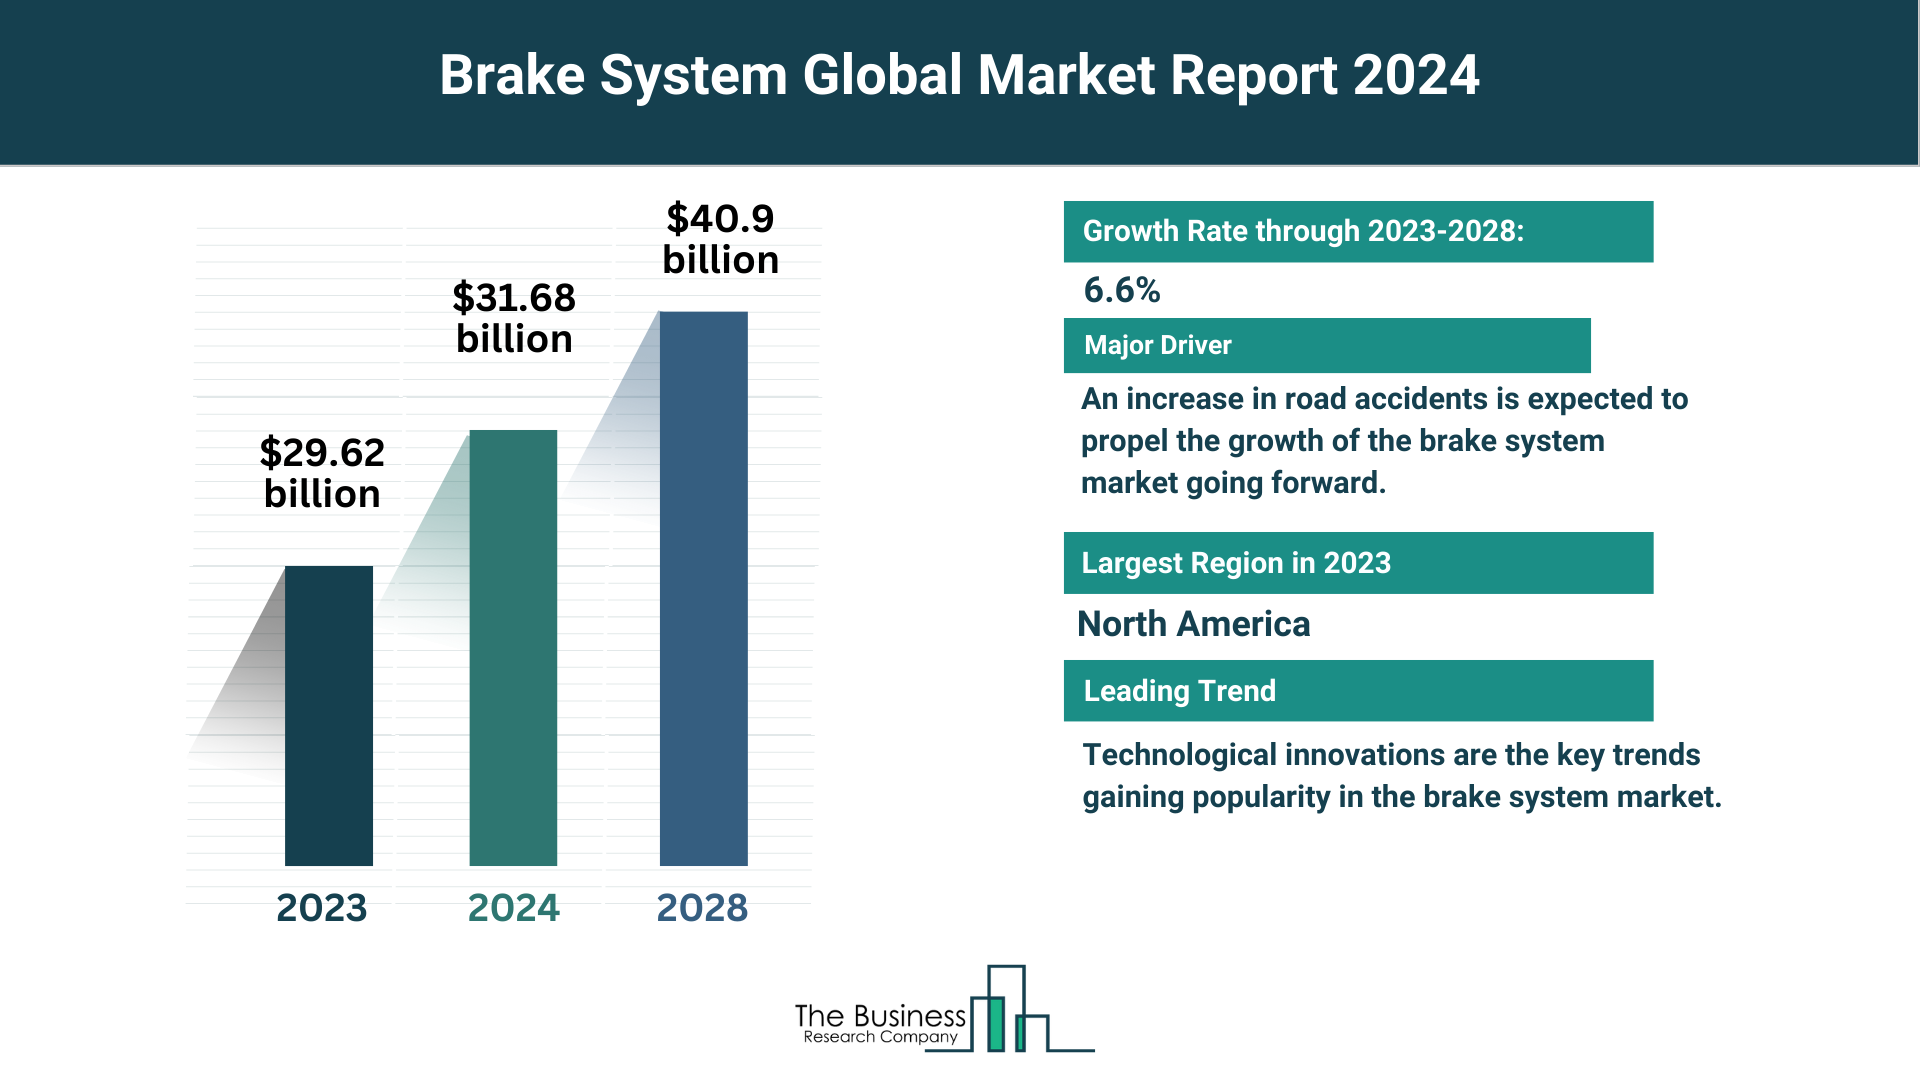 How Is the Brake System Market Expected To Grow Through 2024-2033?